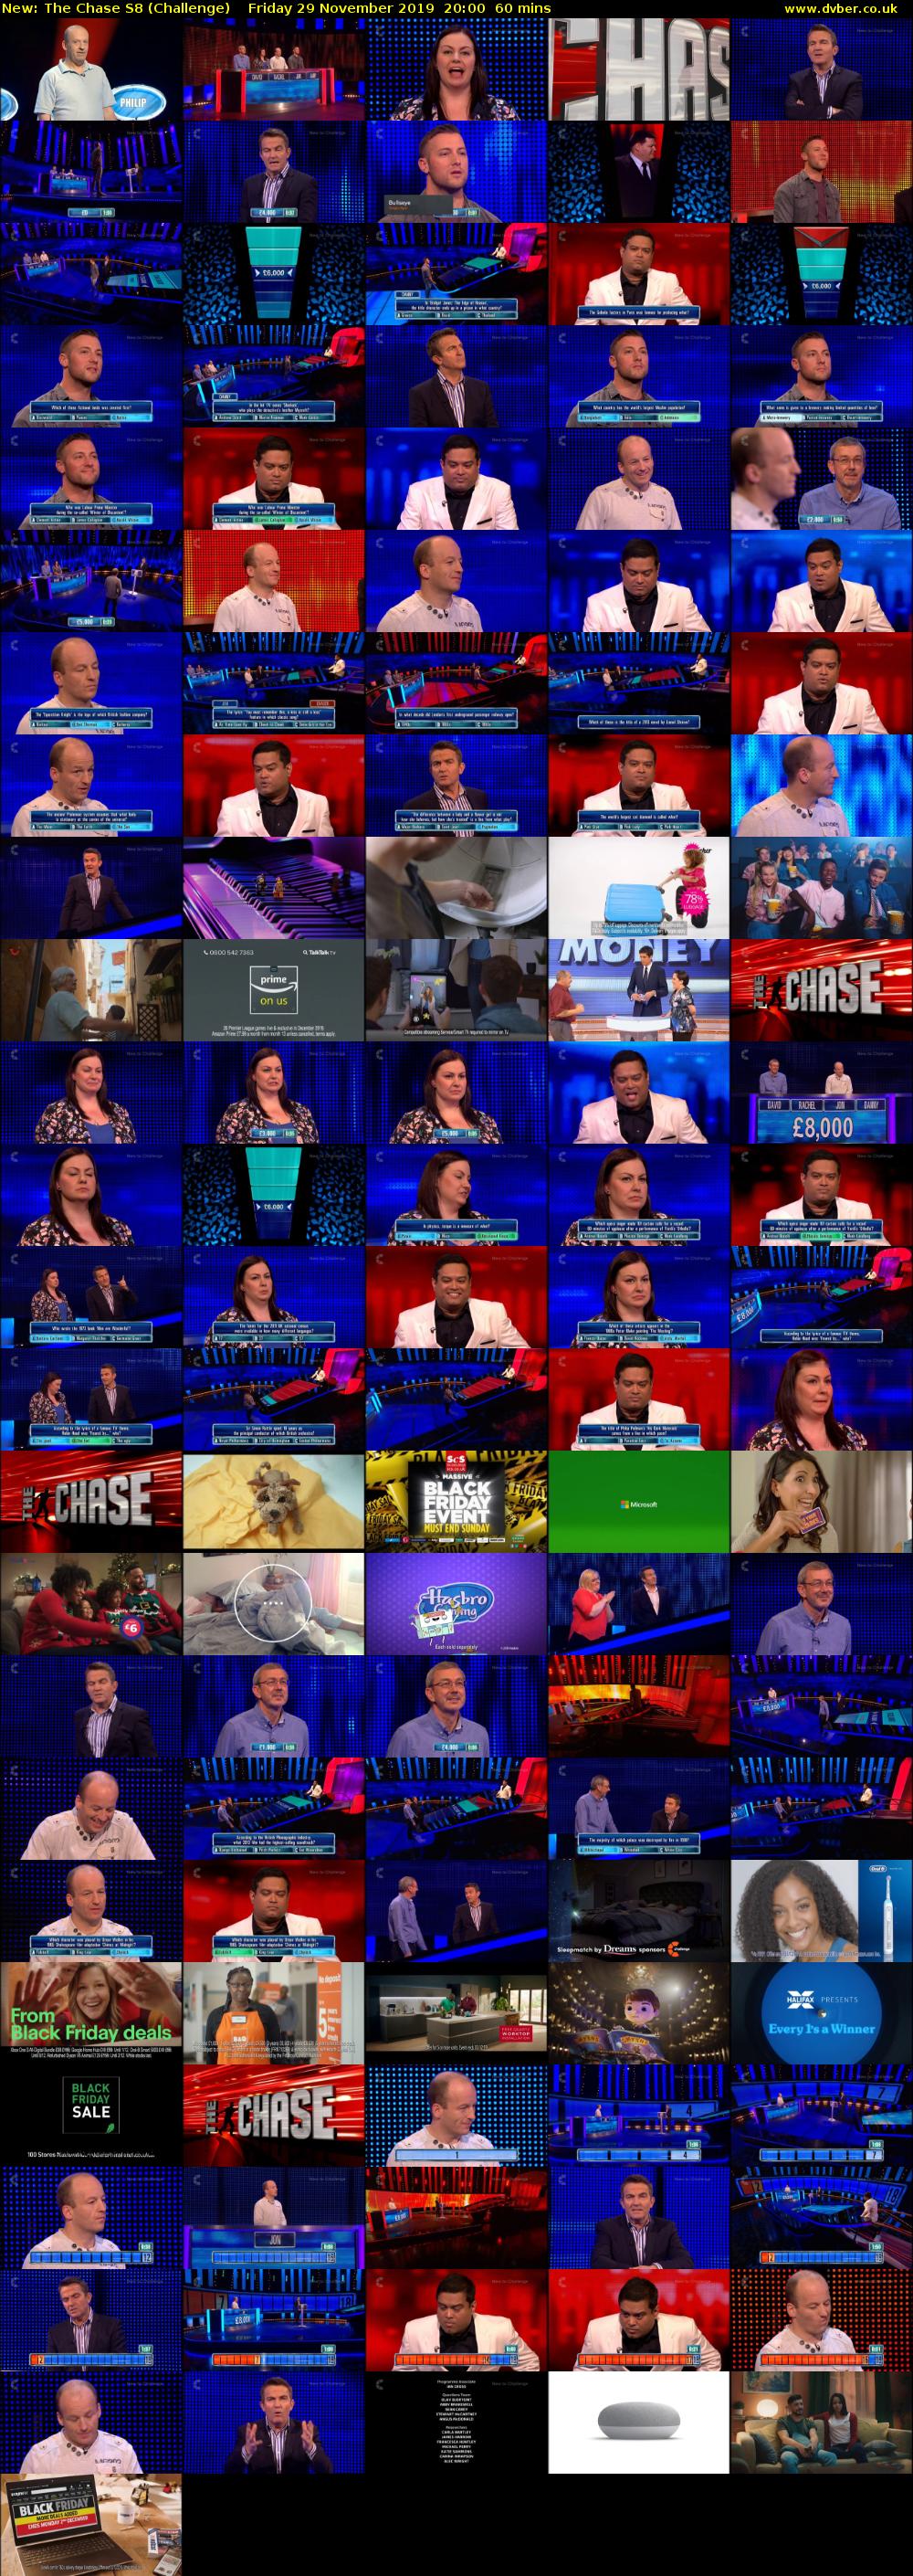 The Chase S8 (Challenge) Friday 29 November 2019 20:00 - 21:00